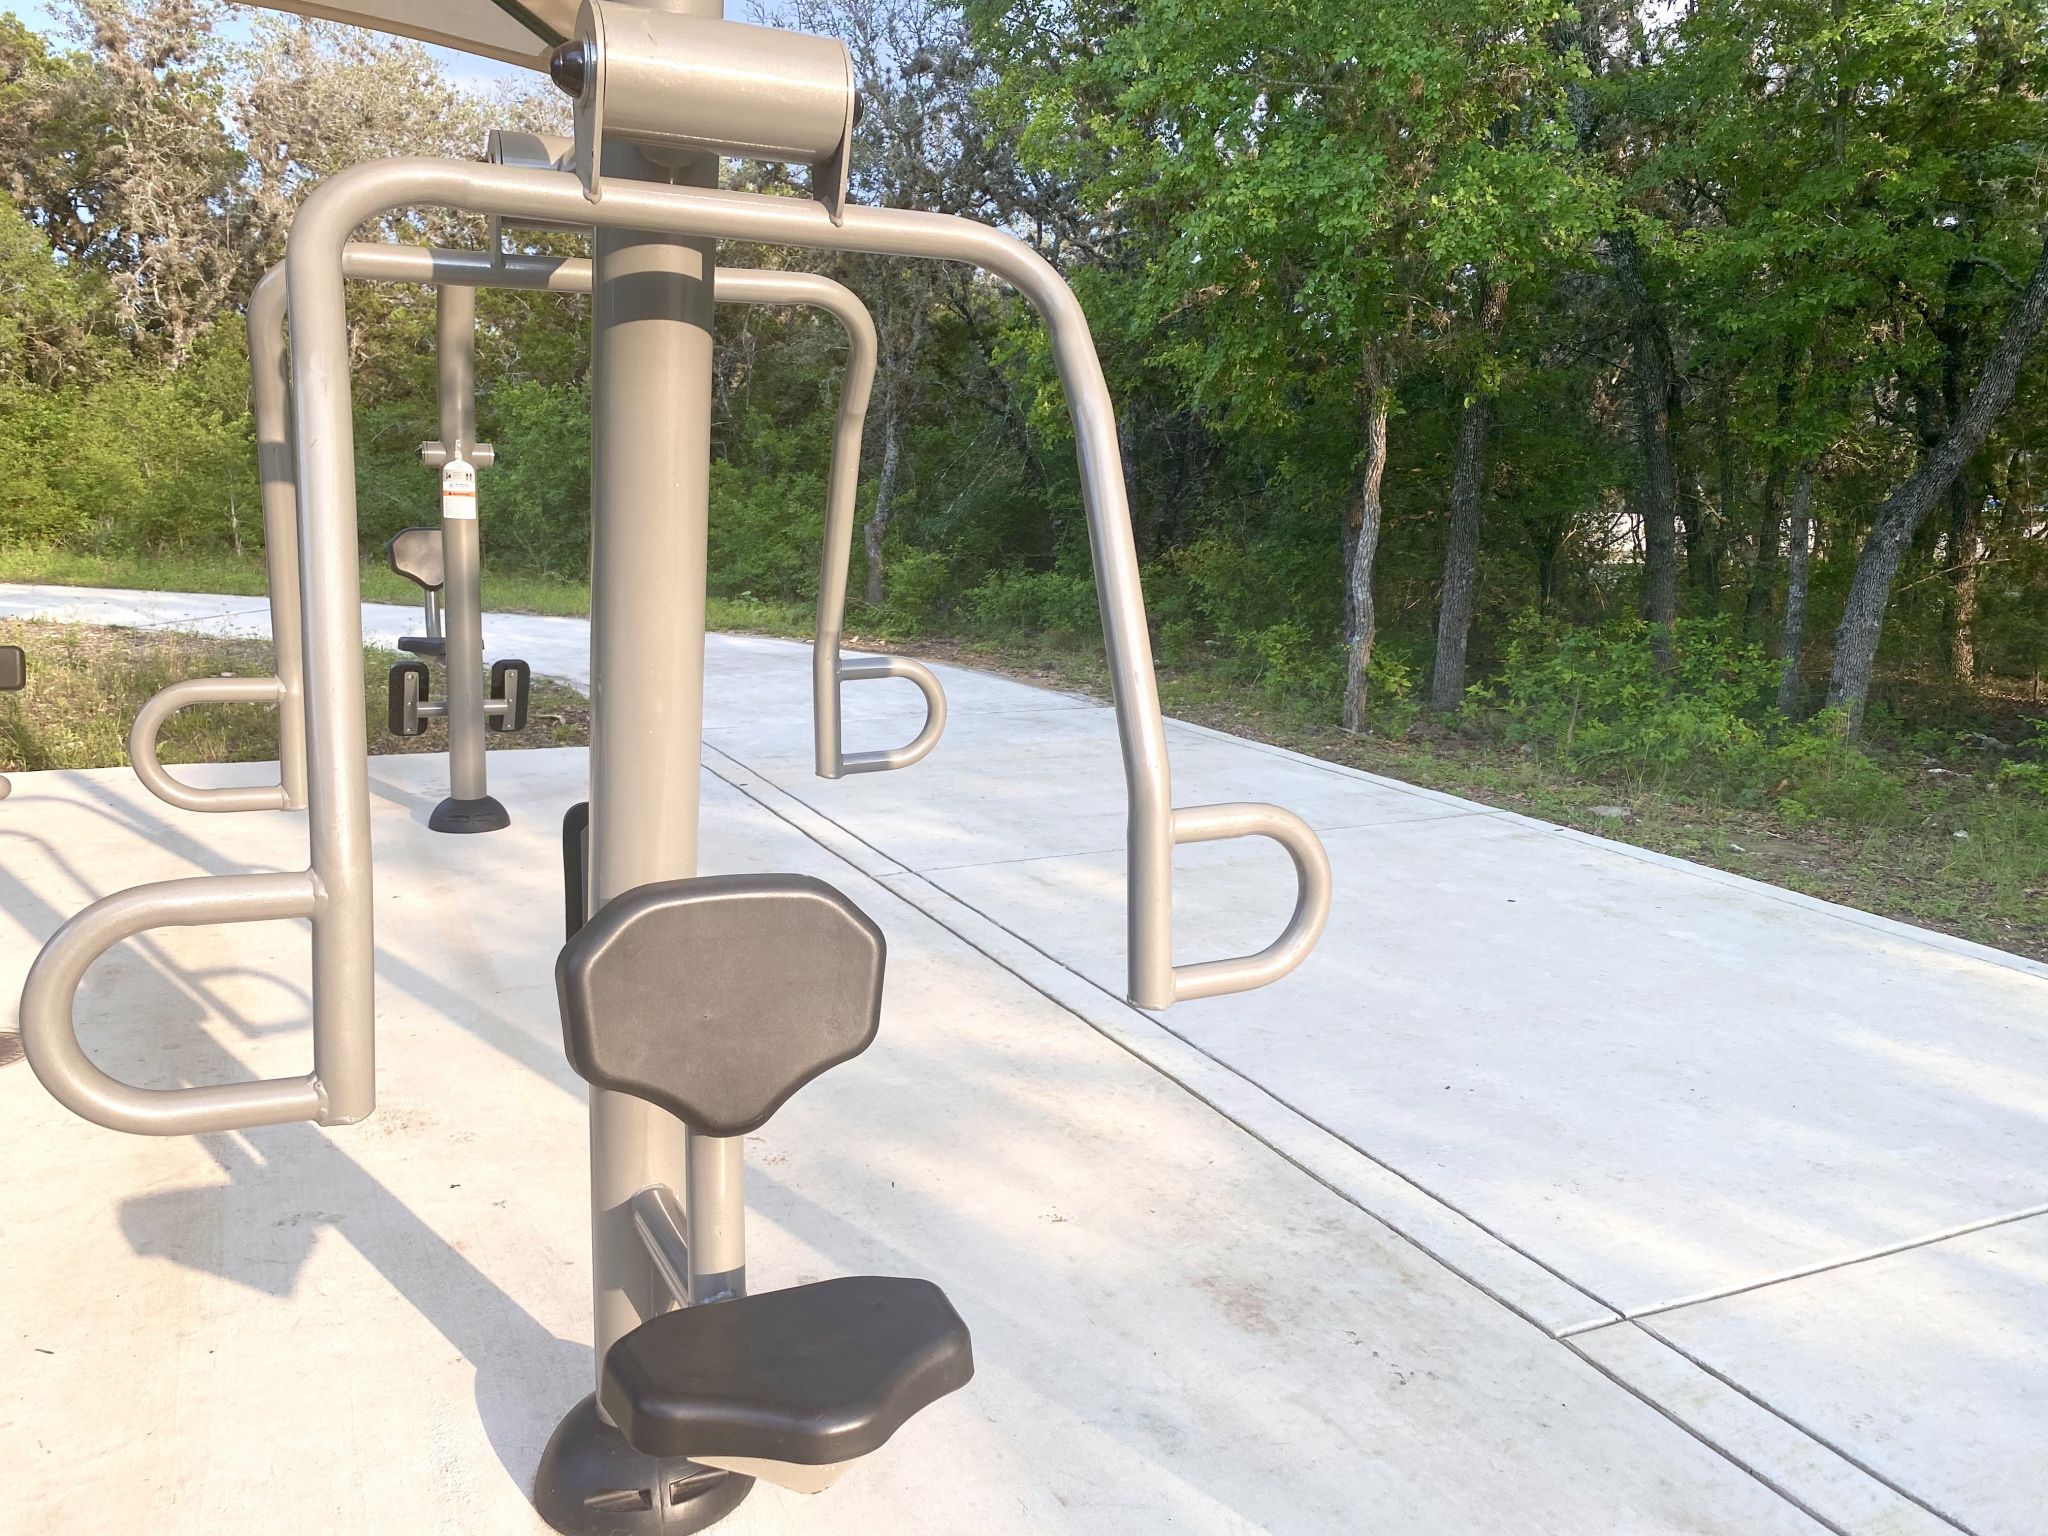 Free outdoor exercise equipment abounds in Cleveland: Stretching